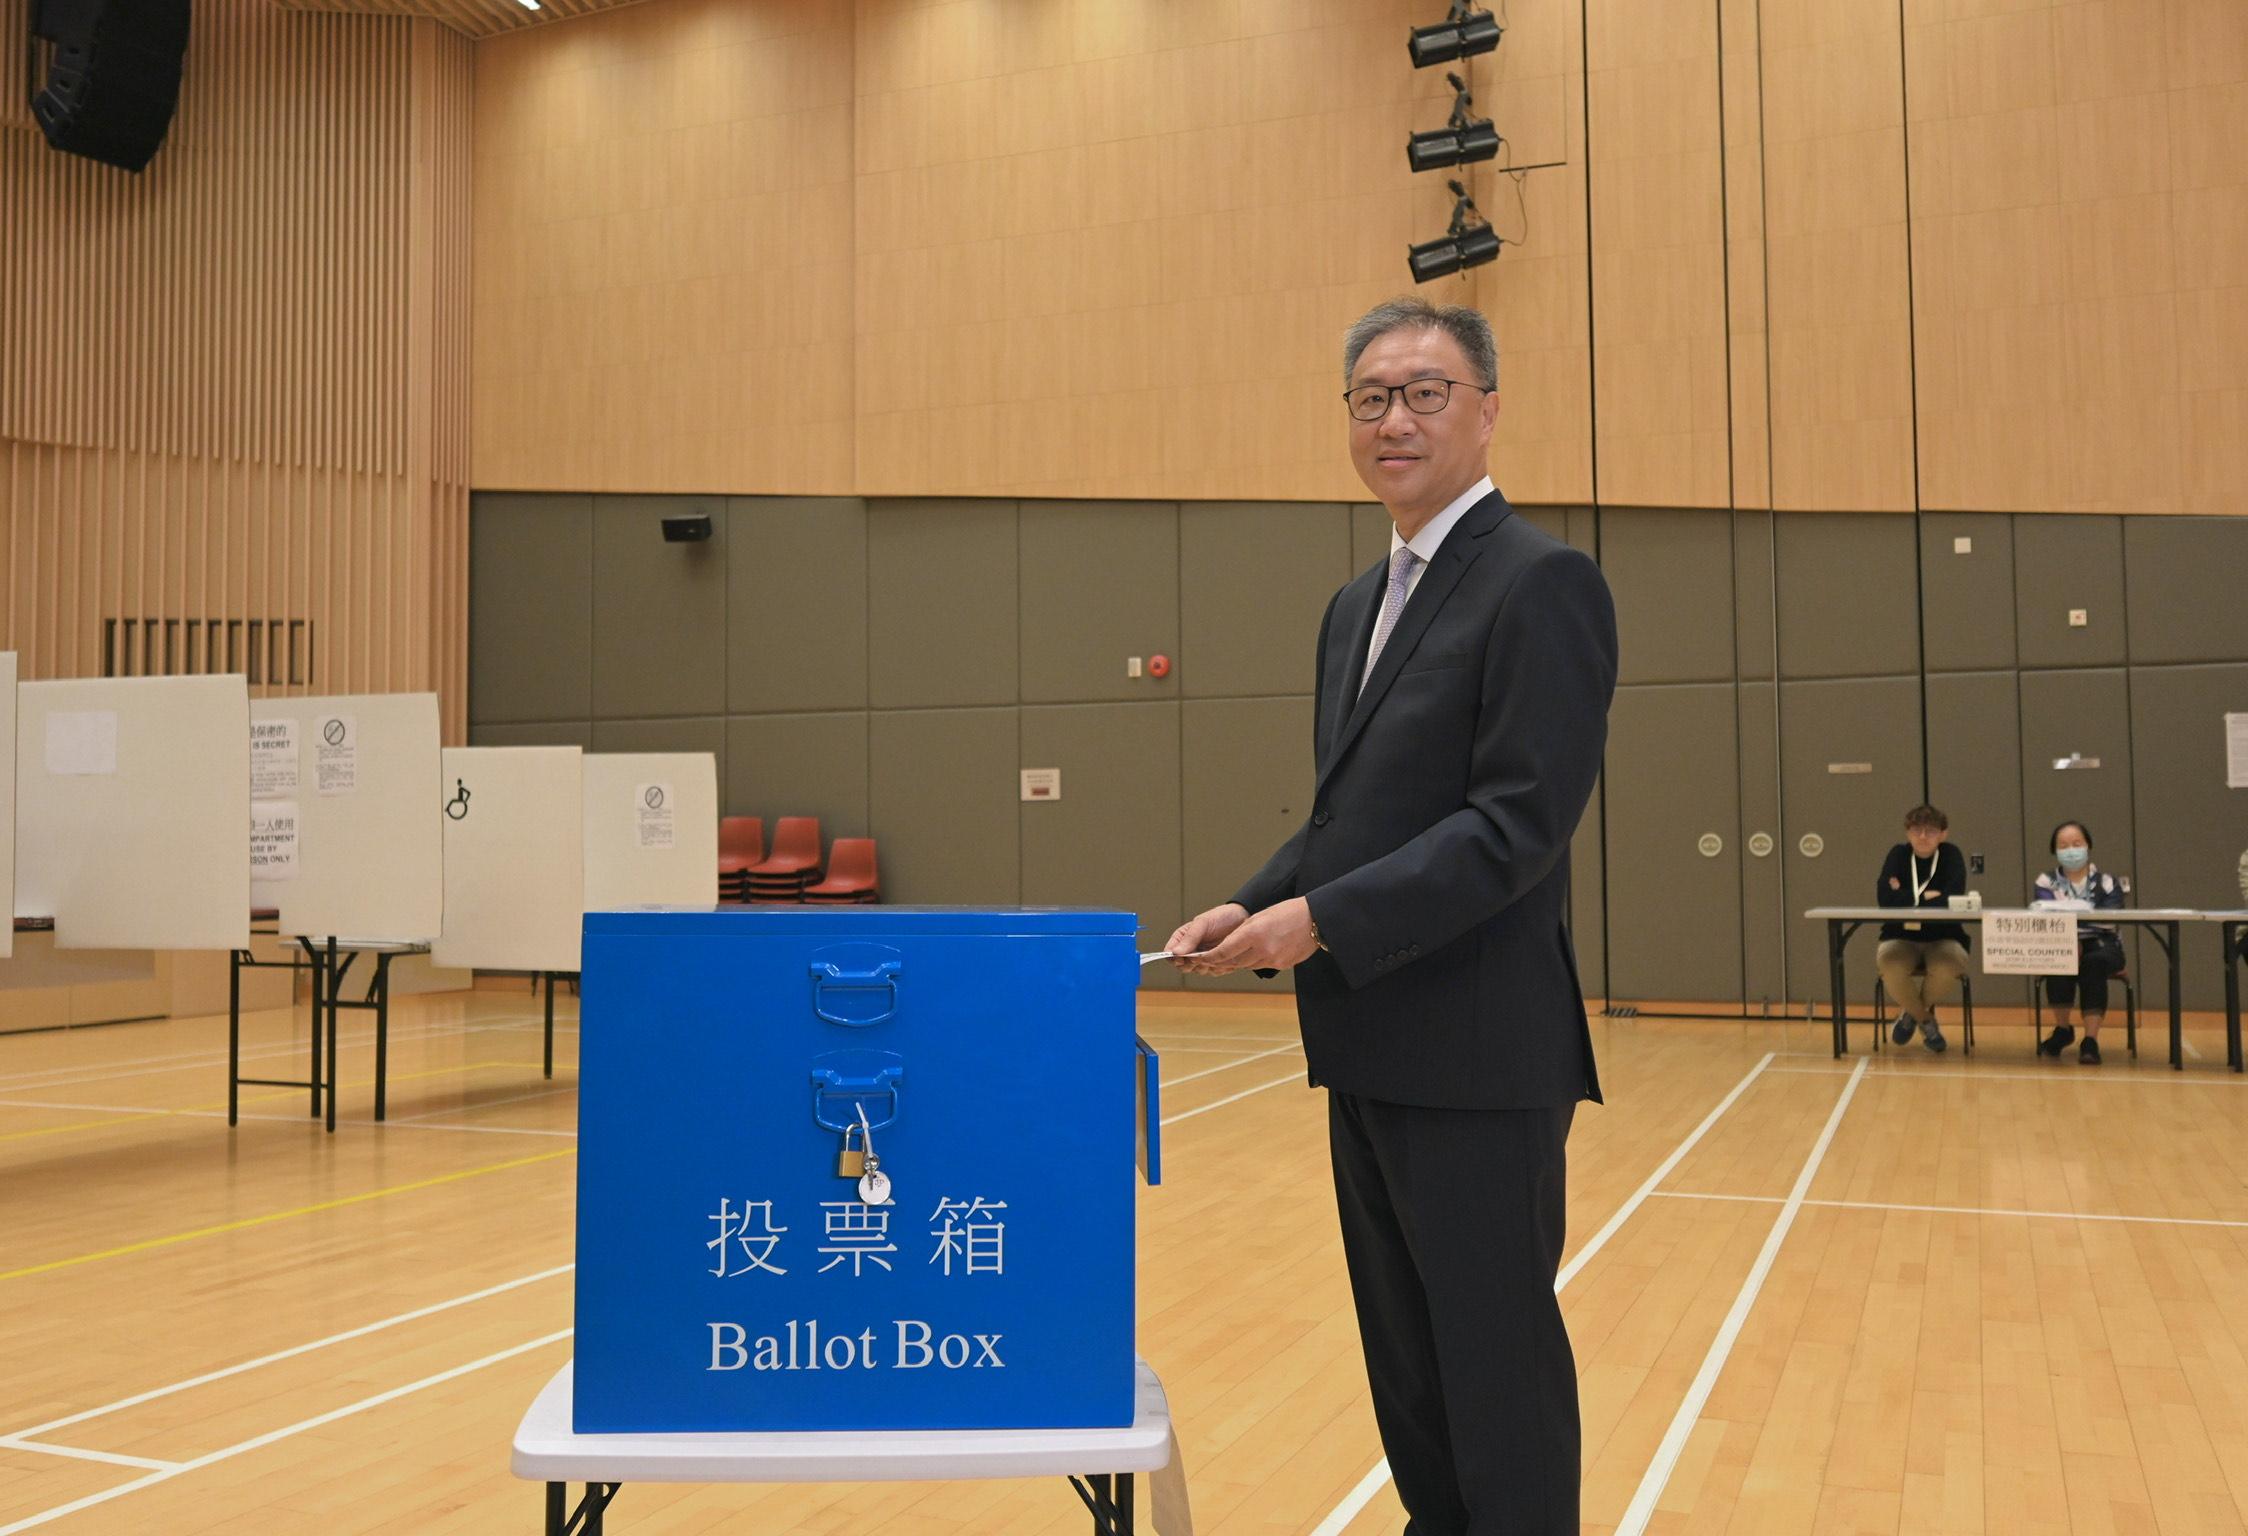 The Chairman of the Electoral Affairs Commission, Mr Justice David Lok, demonstrated the proper polling procedures of the District Council Ordinary Election during his visit to a mock polling station at the North Point Community Hall today (December 5). Photo shows Mr Justice Lok demonstrating the insertion of a ballot paper into a ballot box. 